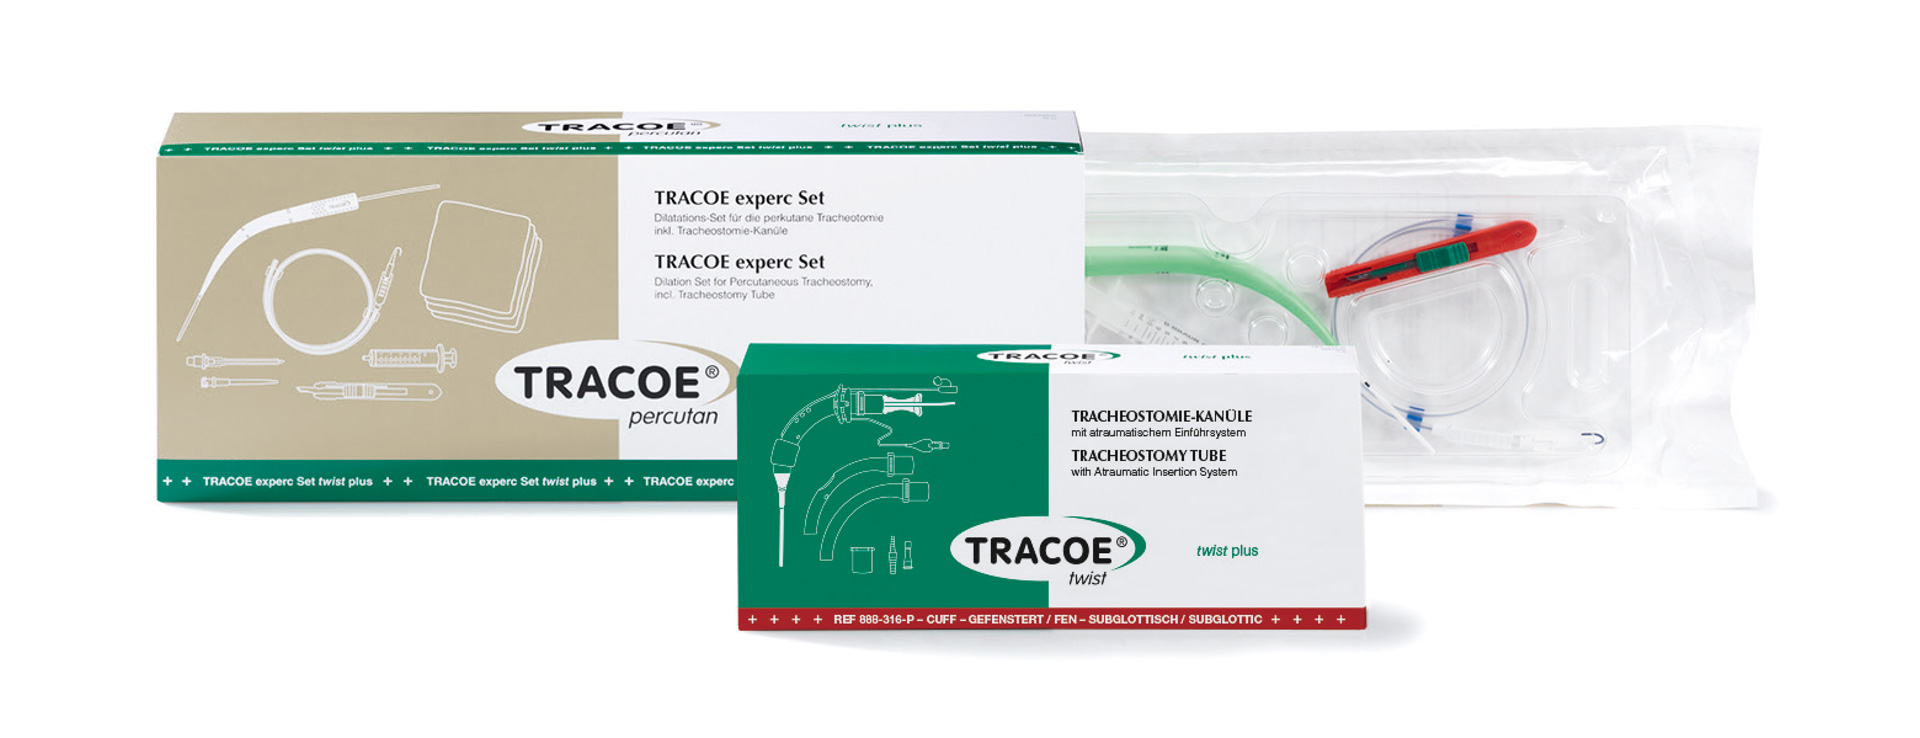 Packaging of Tracoe Experc + Twist Plus Tracheostomy Products placed on a white background. The package is open and shows the contents. The Tracoe Twist Plus tube package is placed in the foreground.